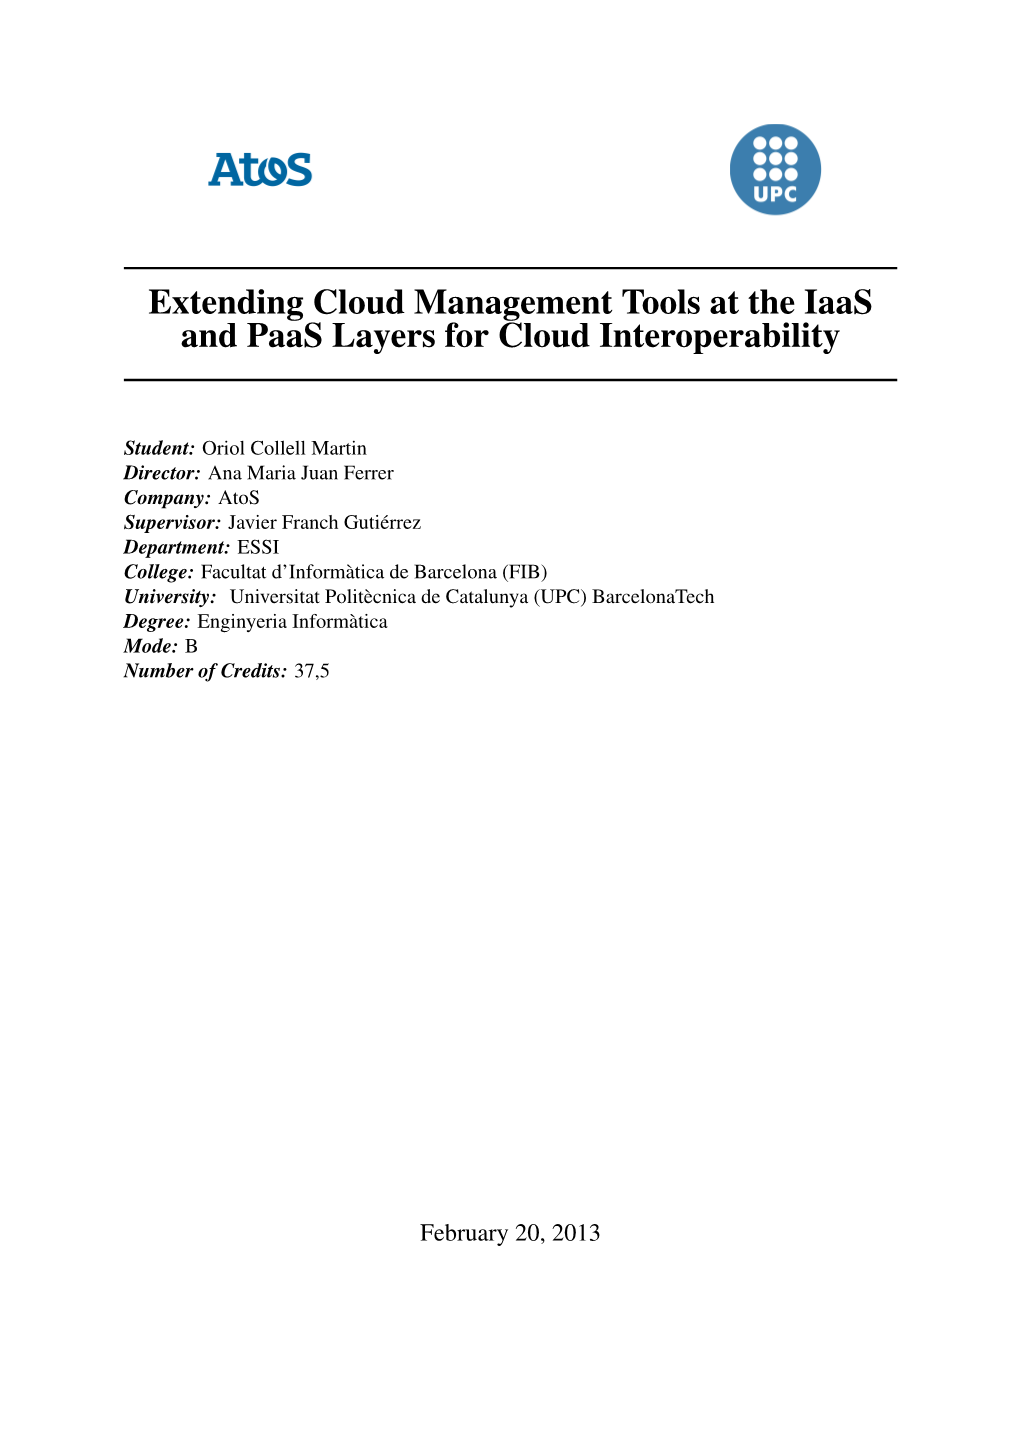 Extending Cloud Management Tools at the Iaas and Paas Layers for Cloud Interoperability